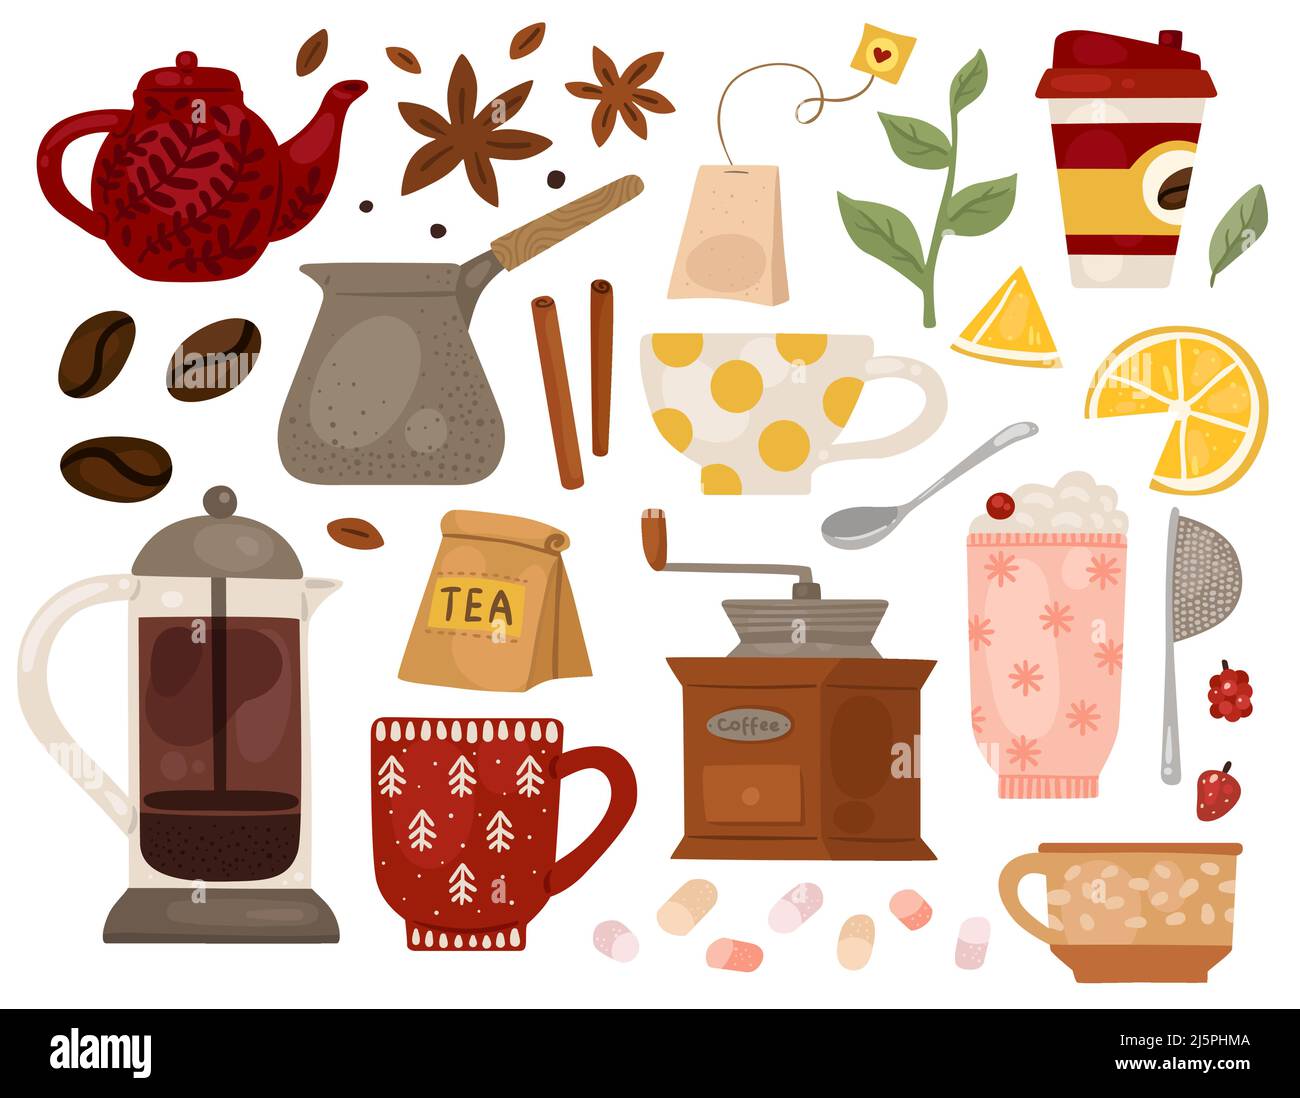 https://c8.alamy.com/comp/2J5PHMA/hot-drinks-different-coffee-and-tea-accessories-spices-and-flavoring-additives-bean-grinders-teapots-with-cups-french-press-vector-traditional-2J5PHMA.jpg